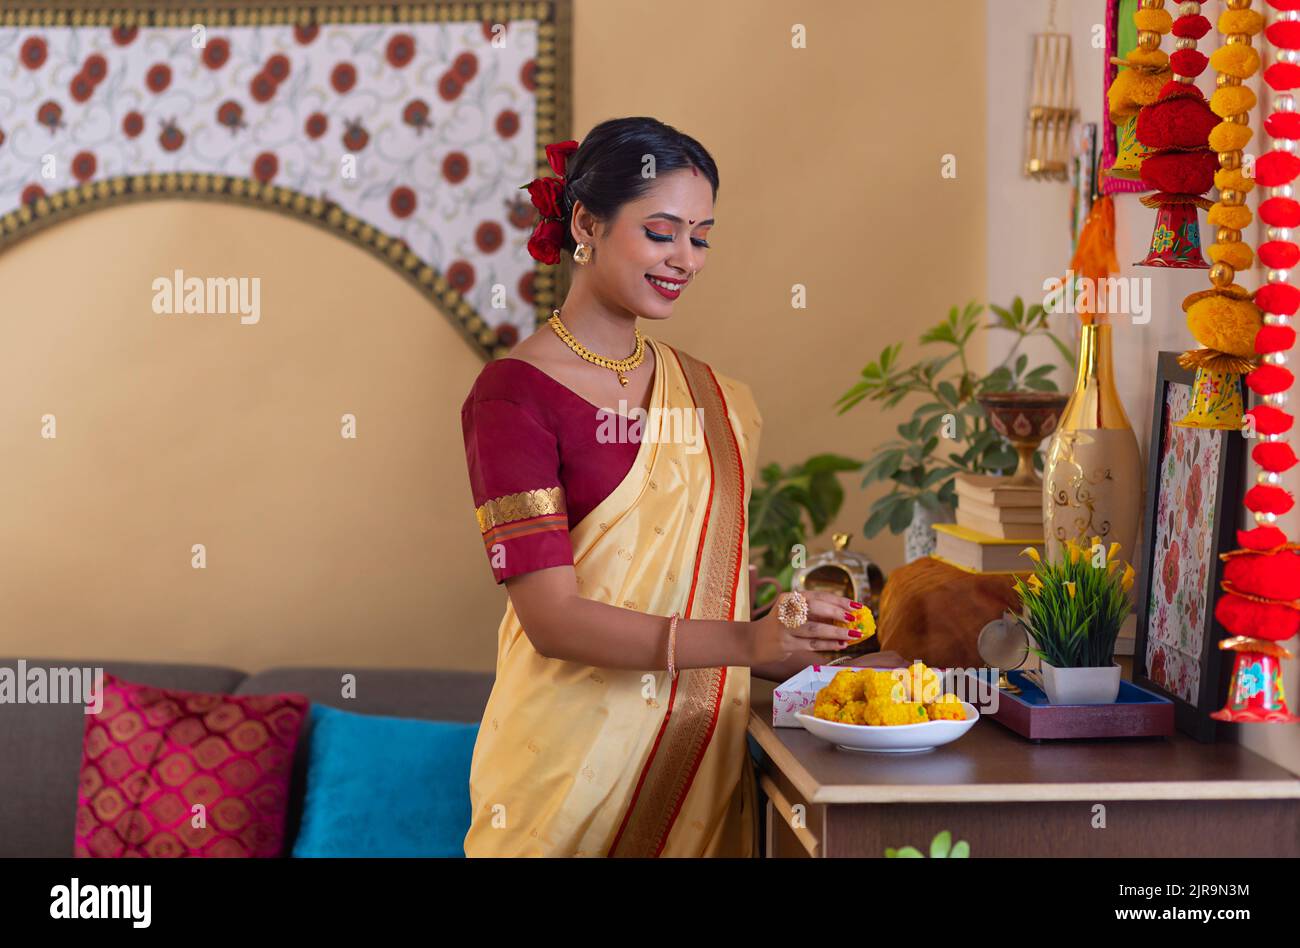 Portrait of a Maharashtrian woman in traditional outfit standing with ladoo Stock Photo